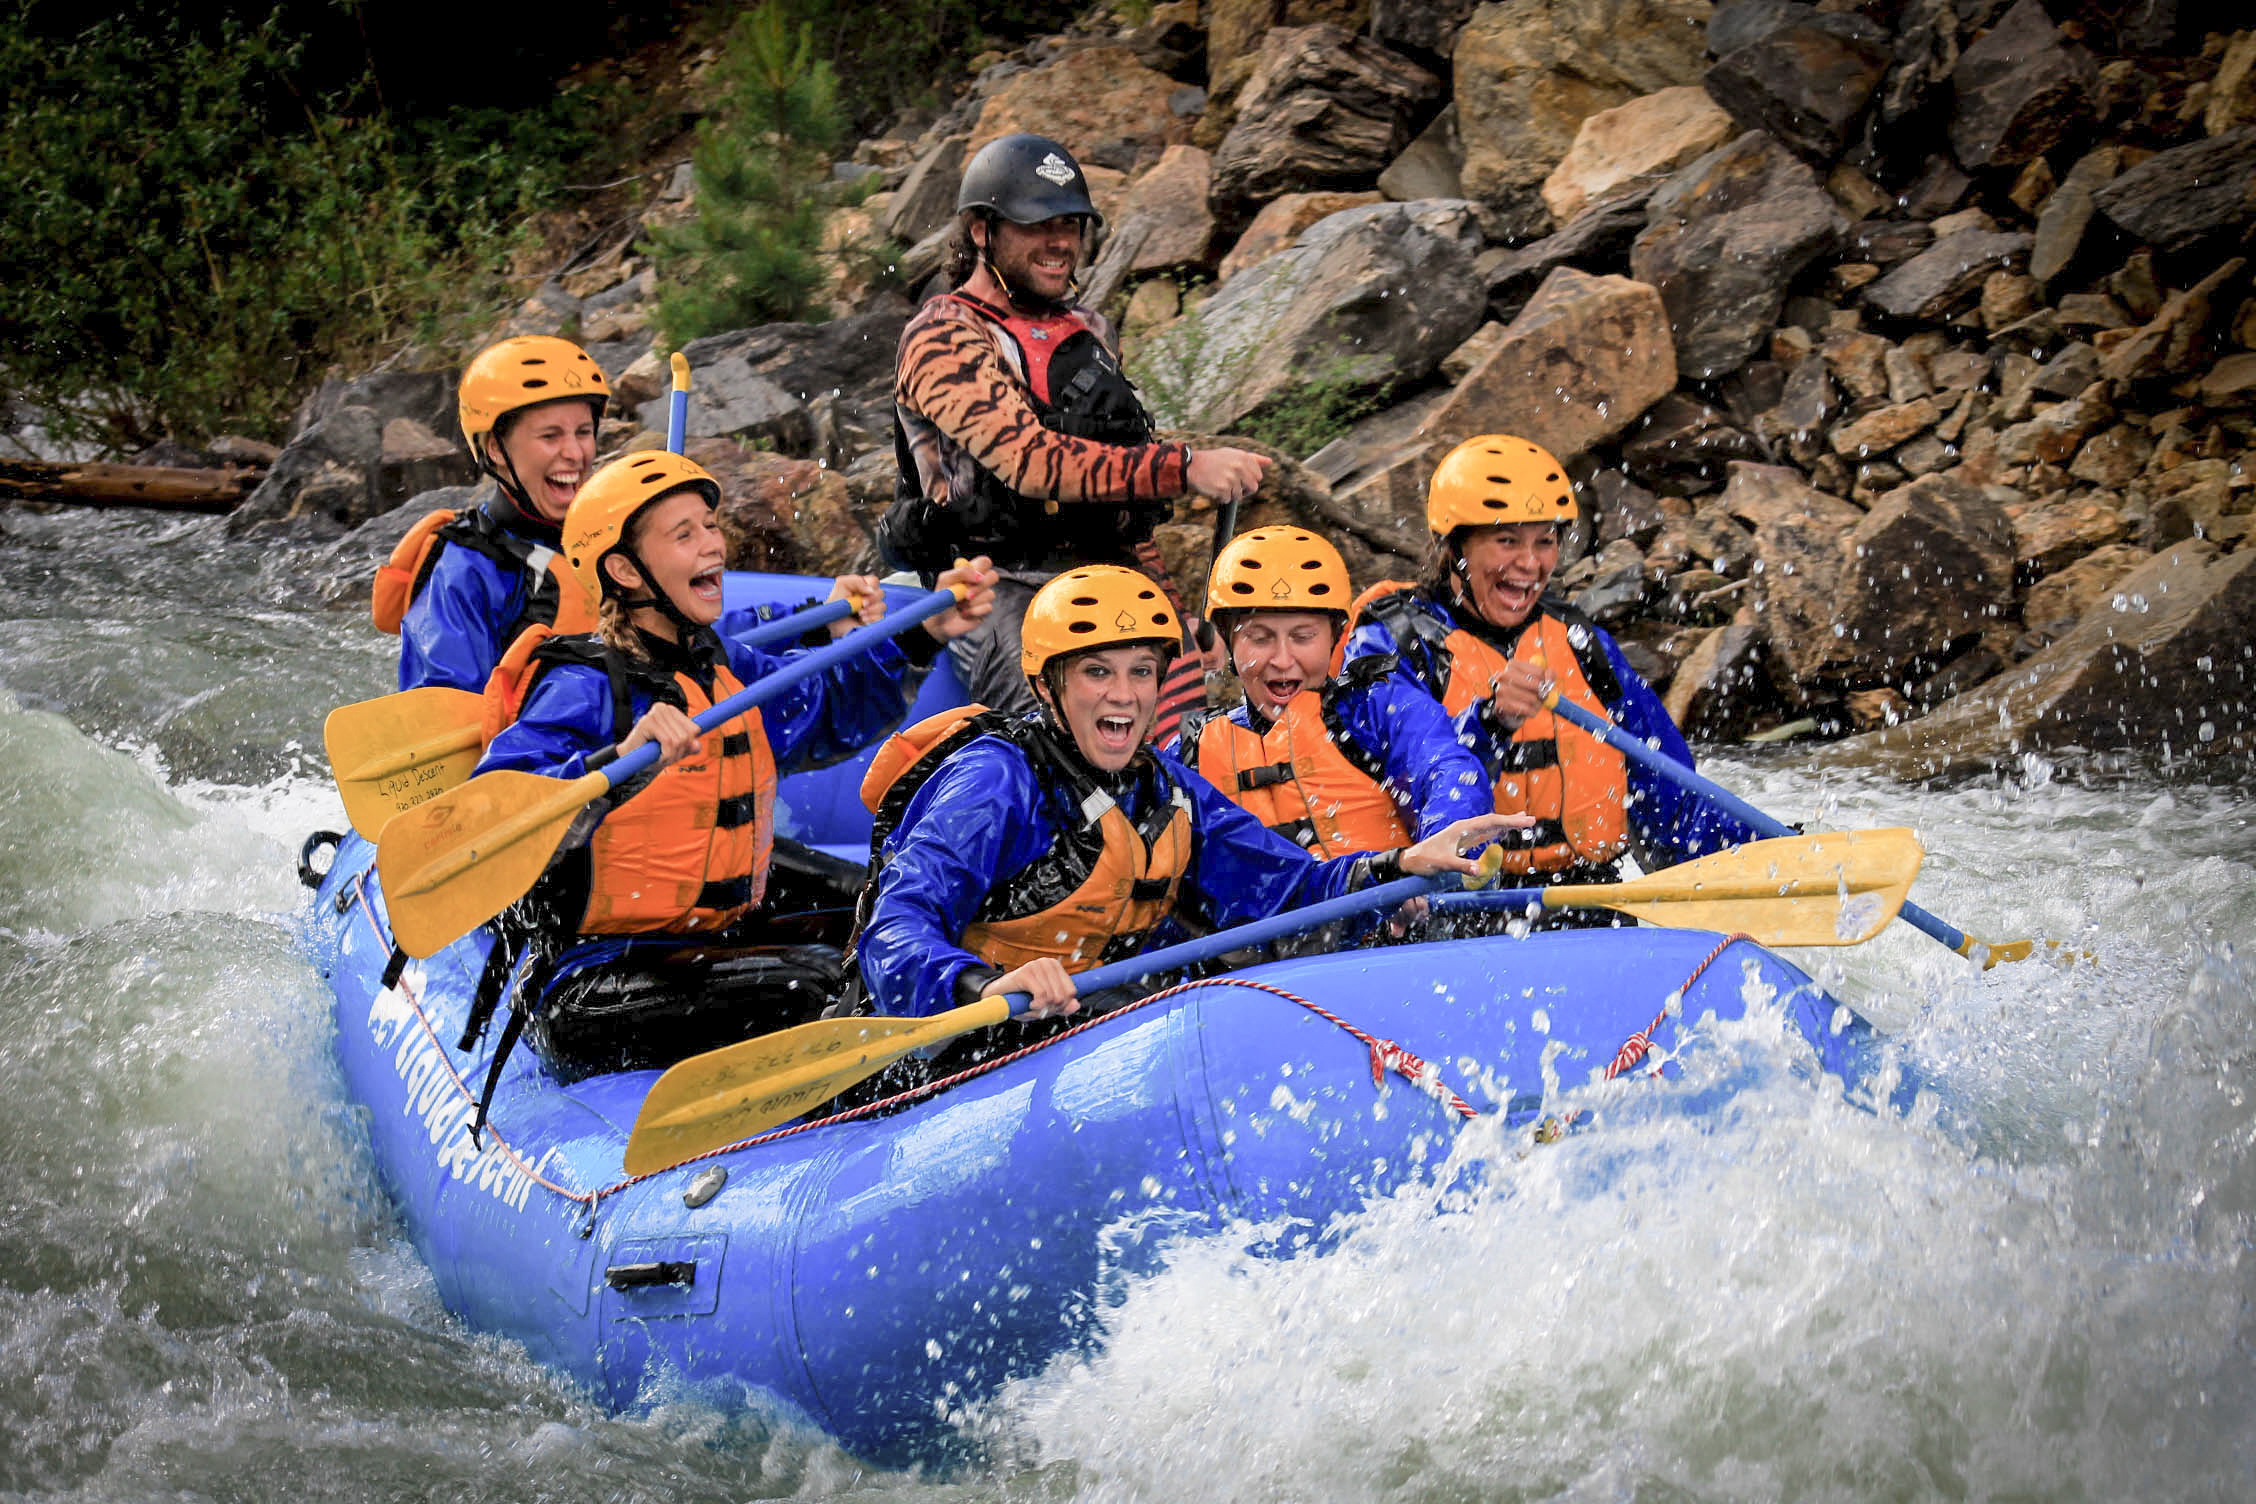 Rafters brace themselves in heavy rapids.